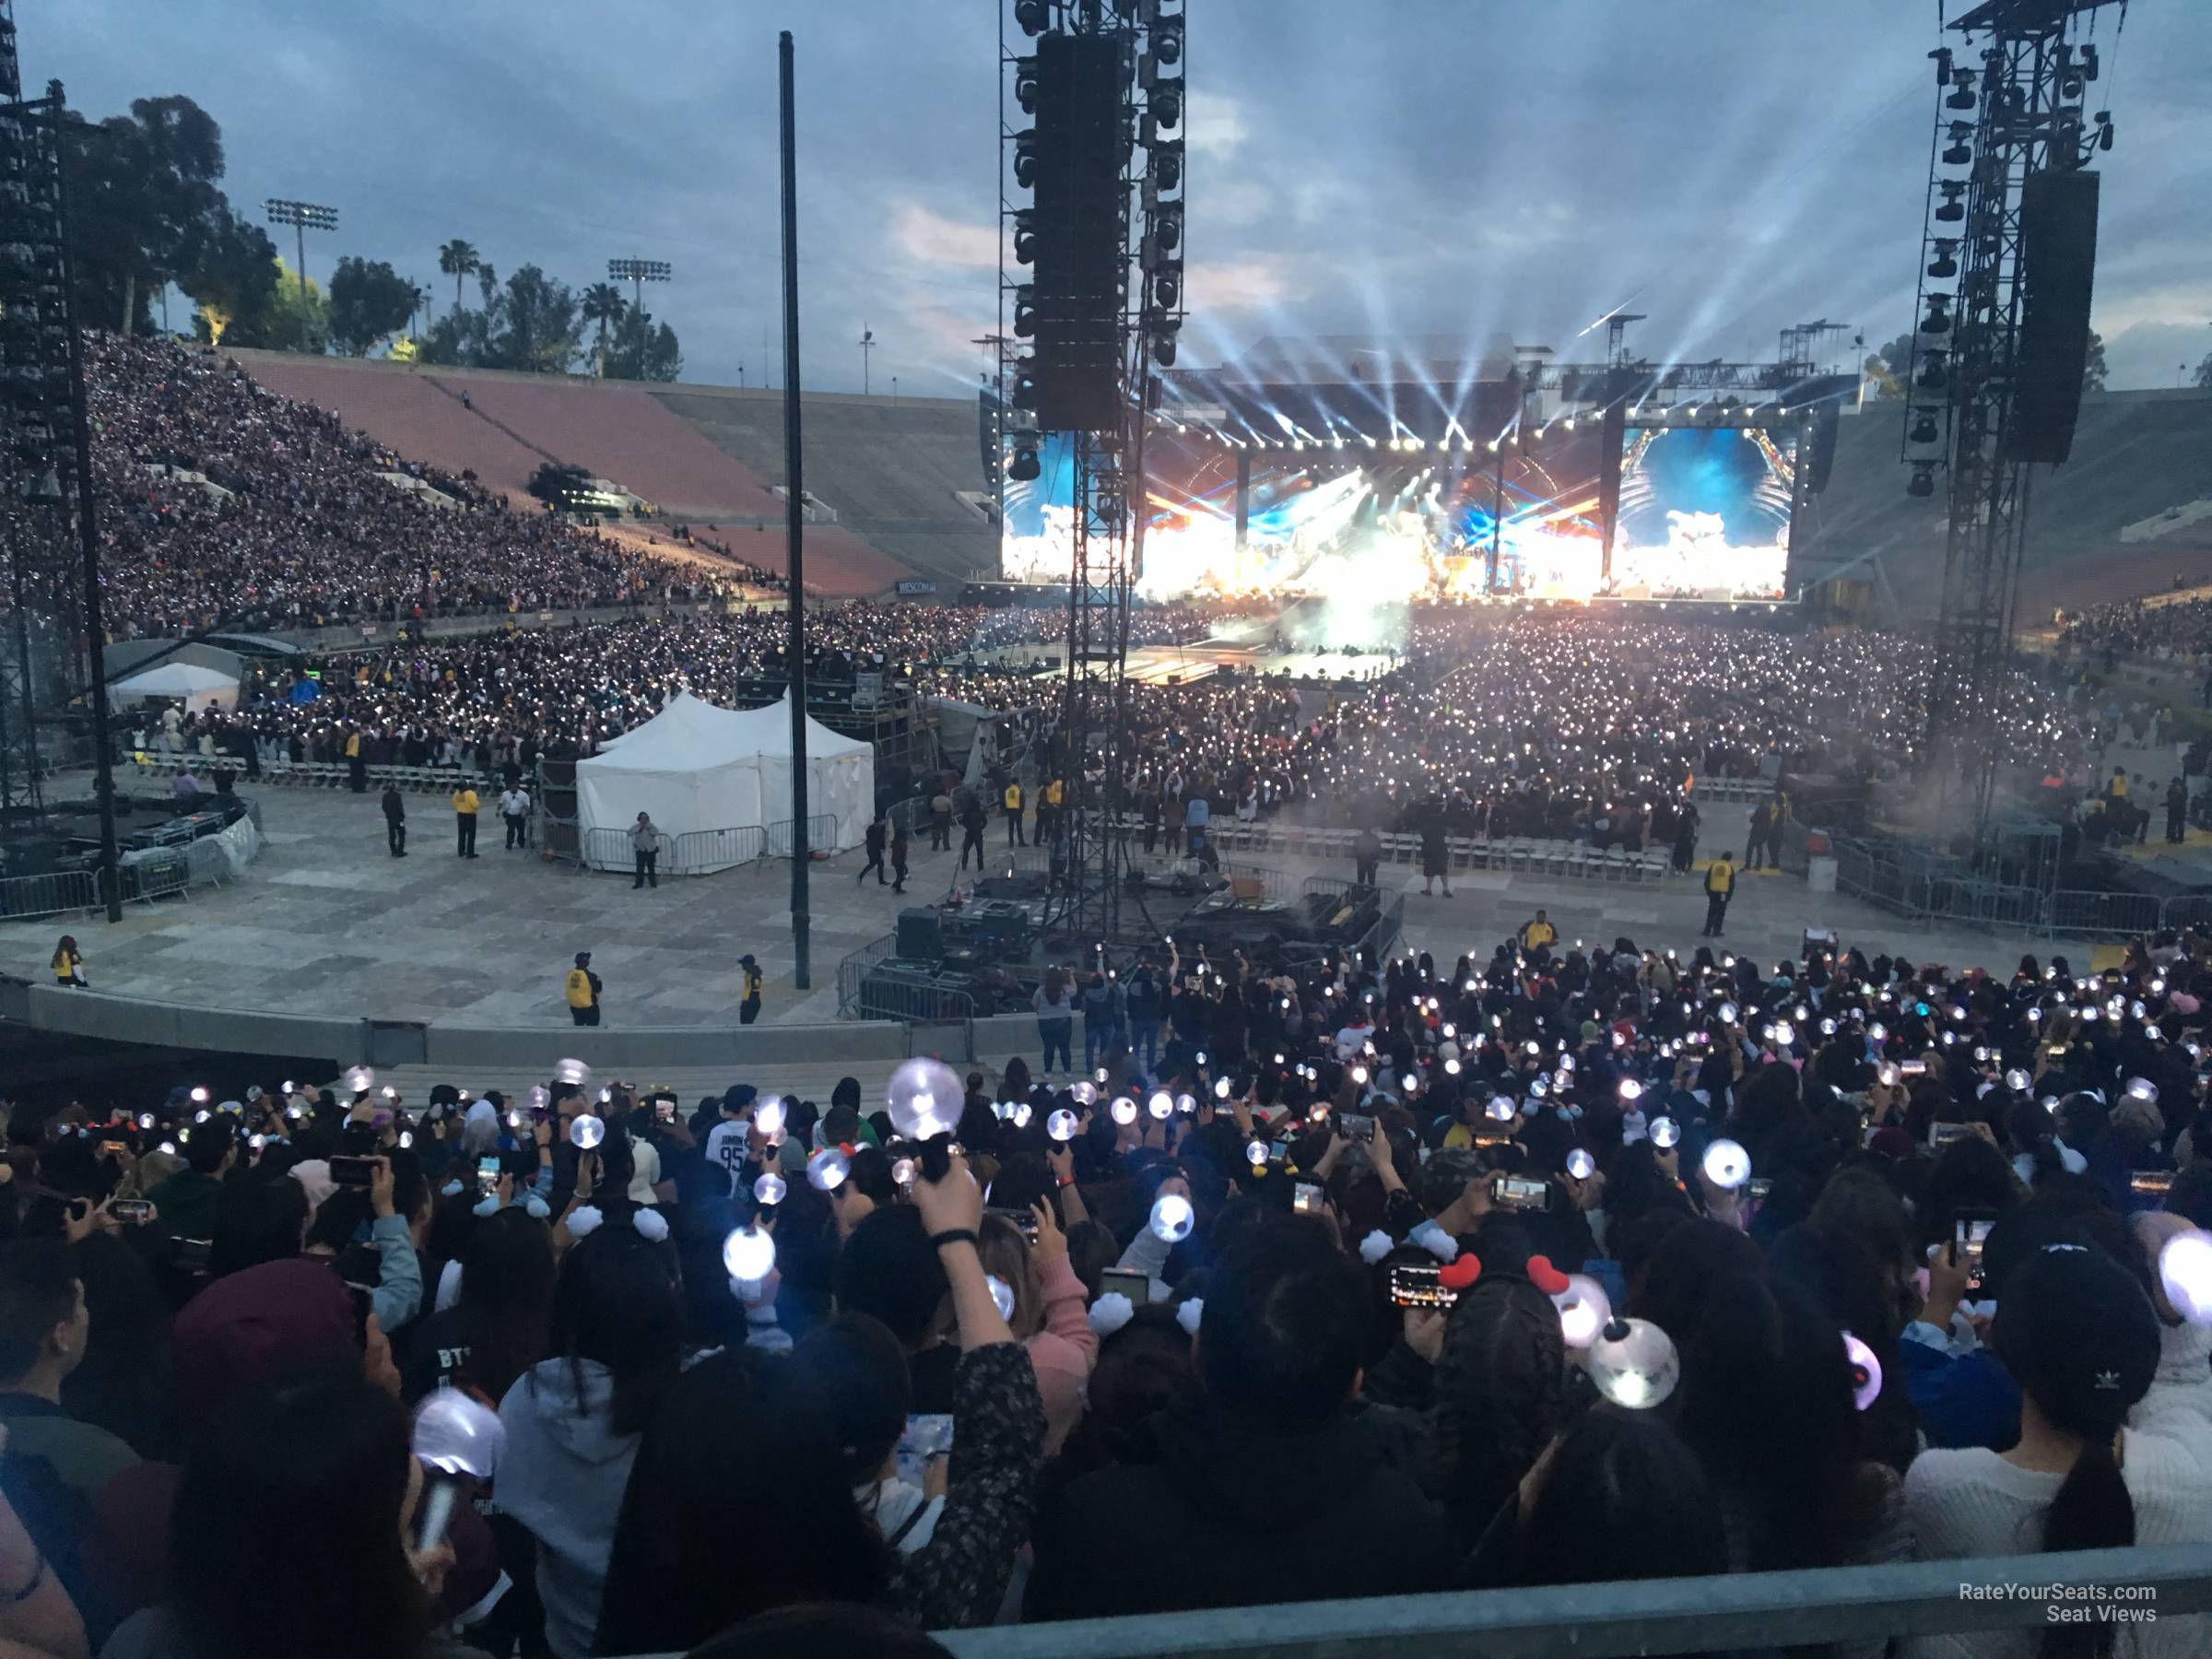 head-on concert view at Rose Bowl Stadium